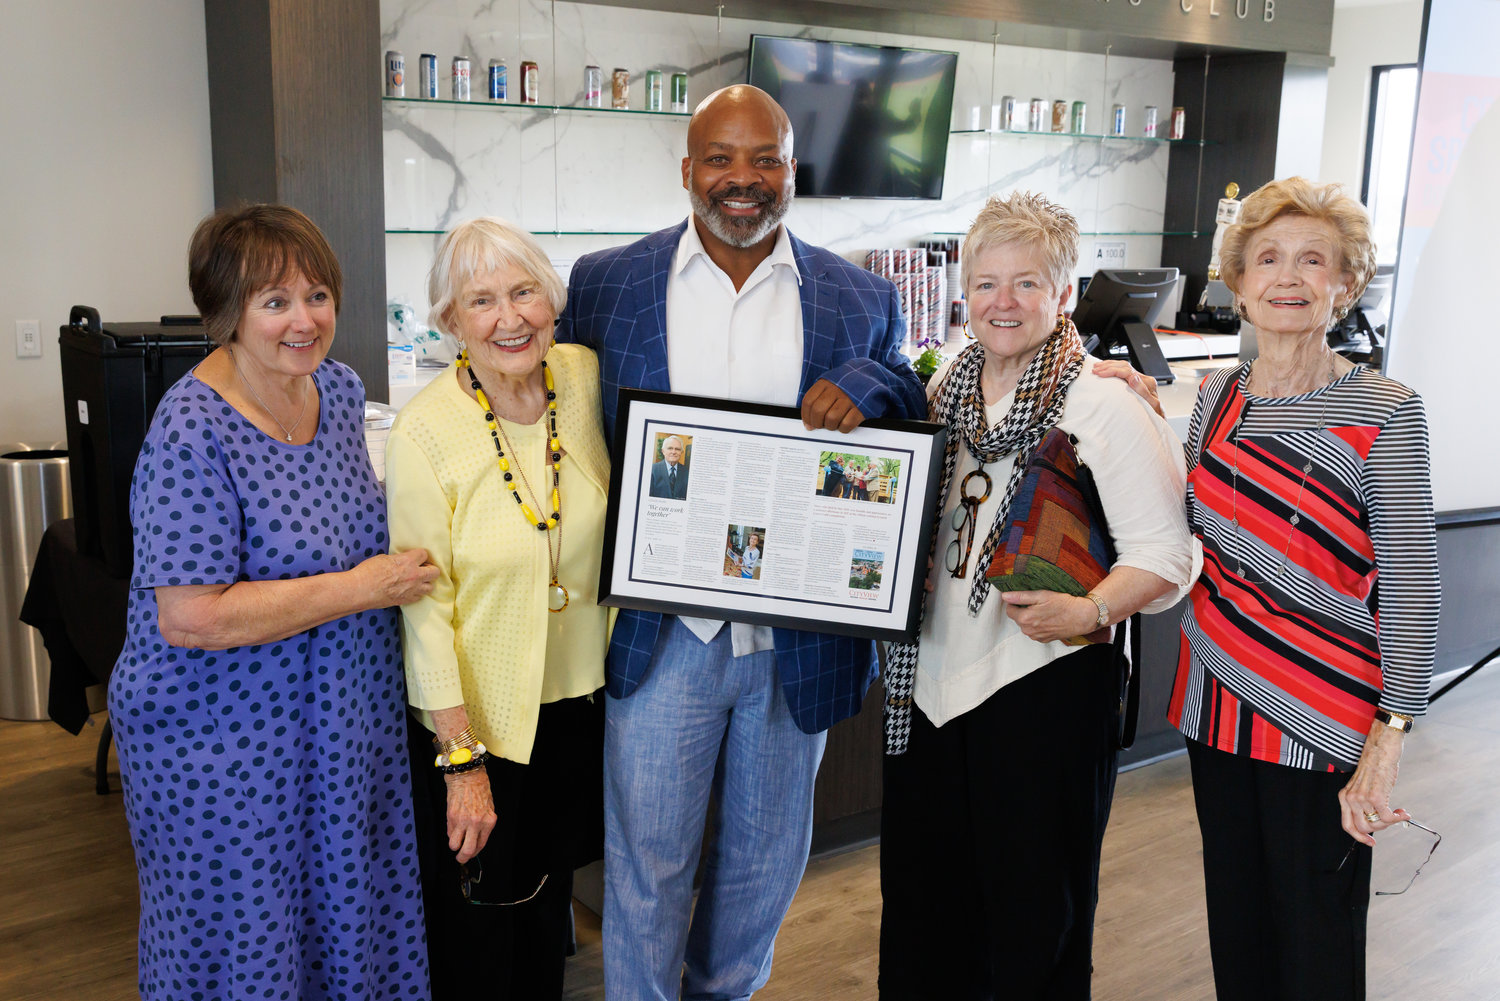 Sally Schmitz, Gillie Revelle, Anthony Ramsey, Faison Covington and Claire Shaw with the 2022 CityView Downtown Visionaries Award recognizing the contributions of the late Harry Shaw. The award was presented during the 2022 CityView Downtown Visionaries Luncheon Wednesday at Segra Stadium.